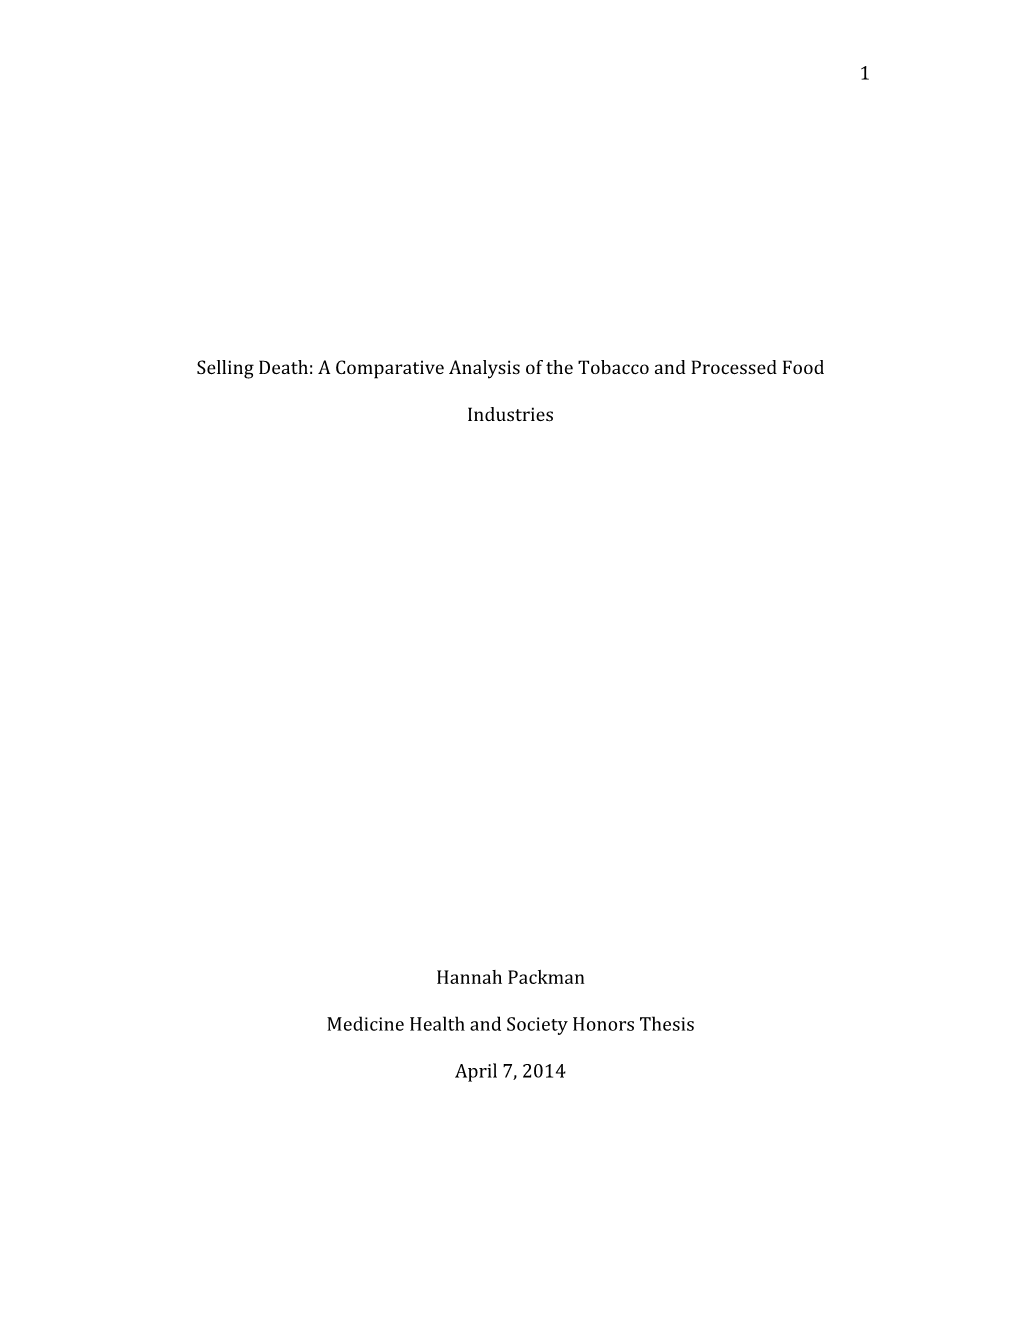 1 Selling Death: a Comparative Analysis of the Tobacco And